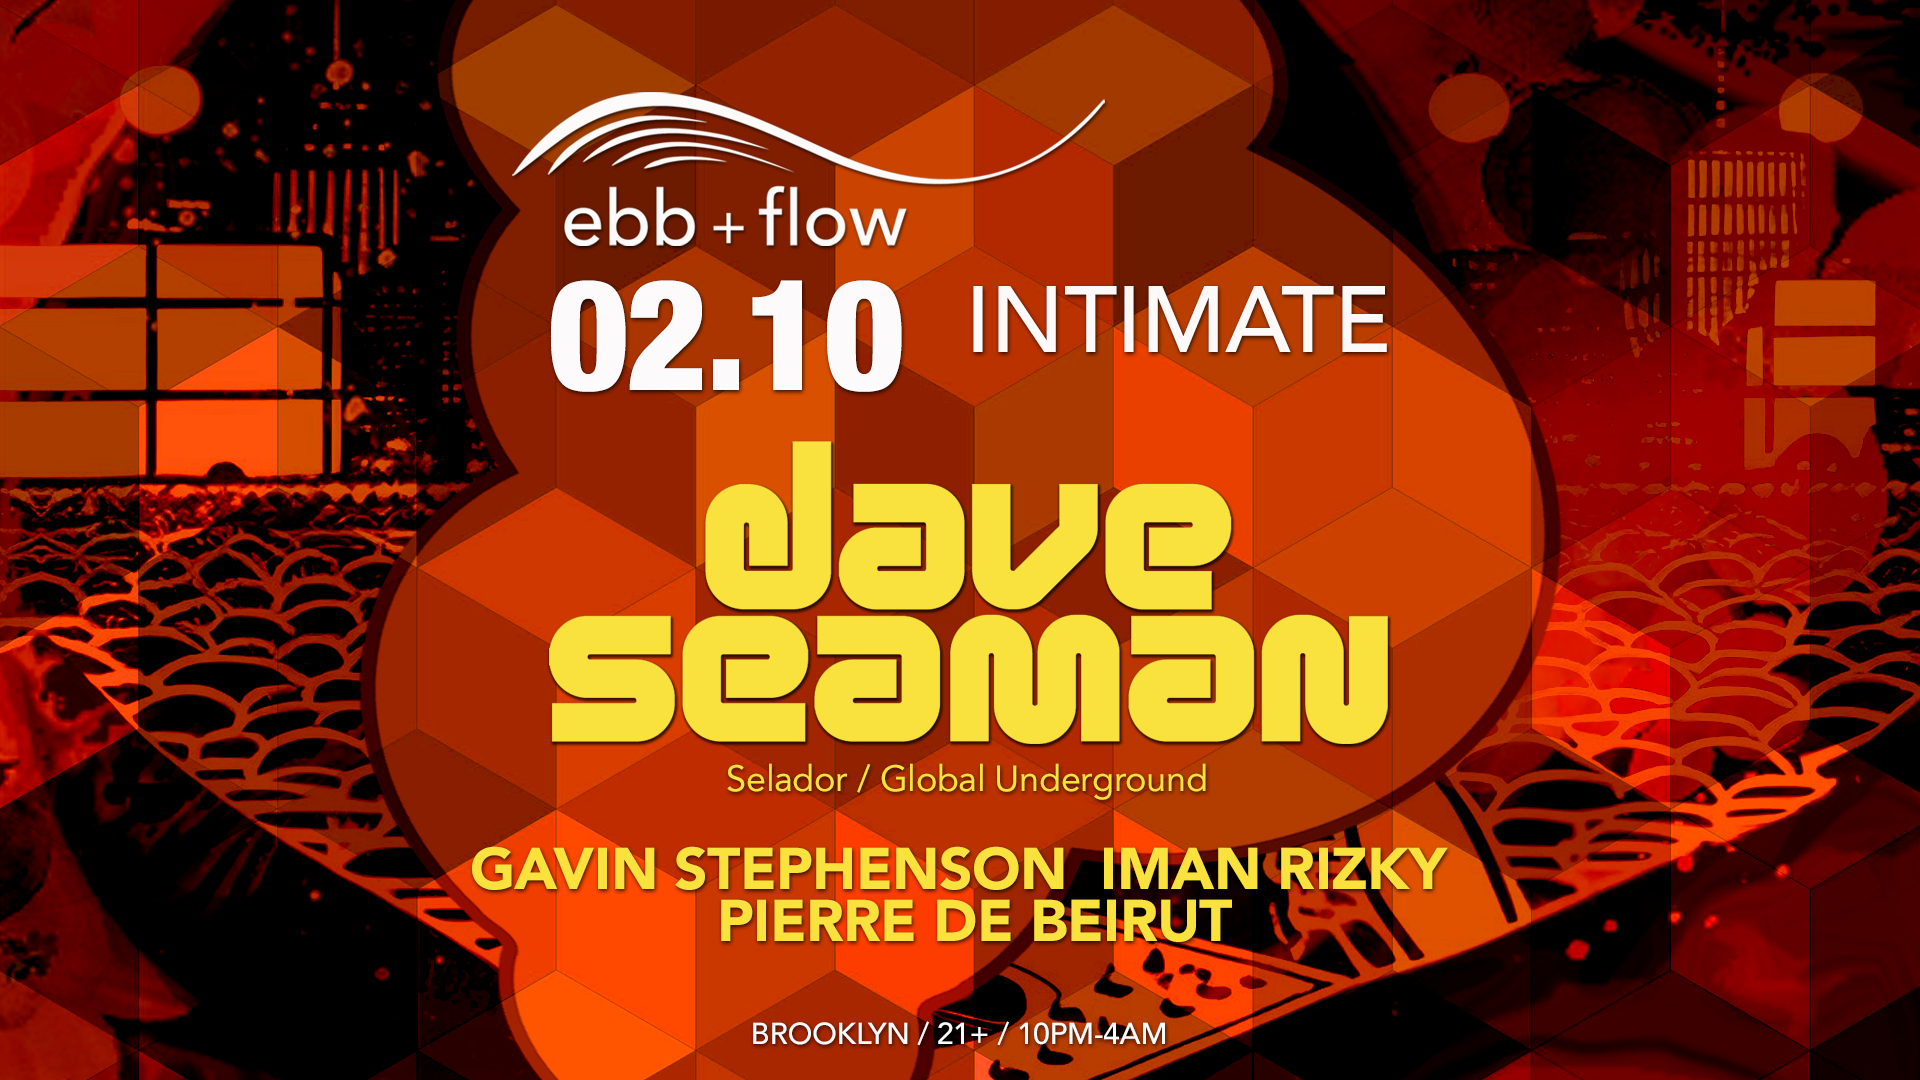 ebb + flow Intimate with Dave Seaman - フライヤー表